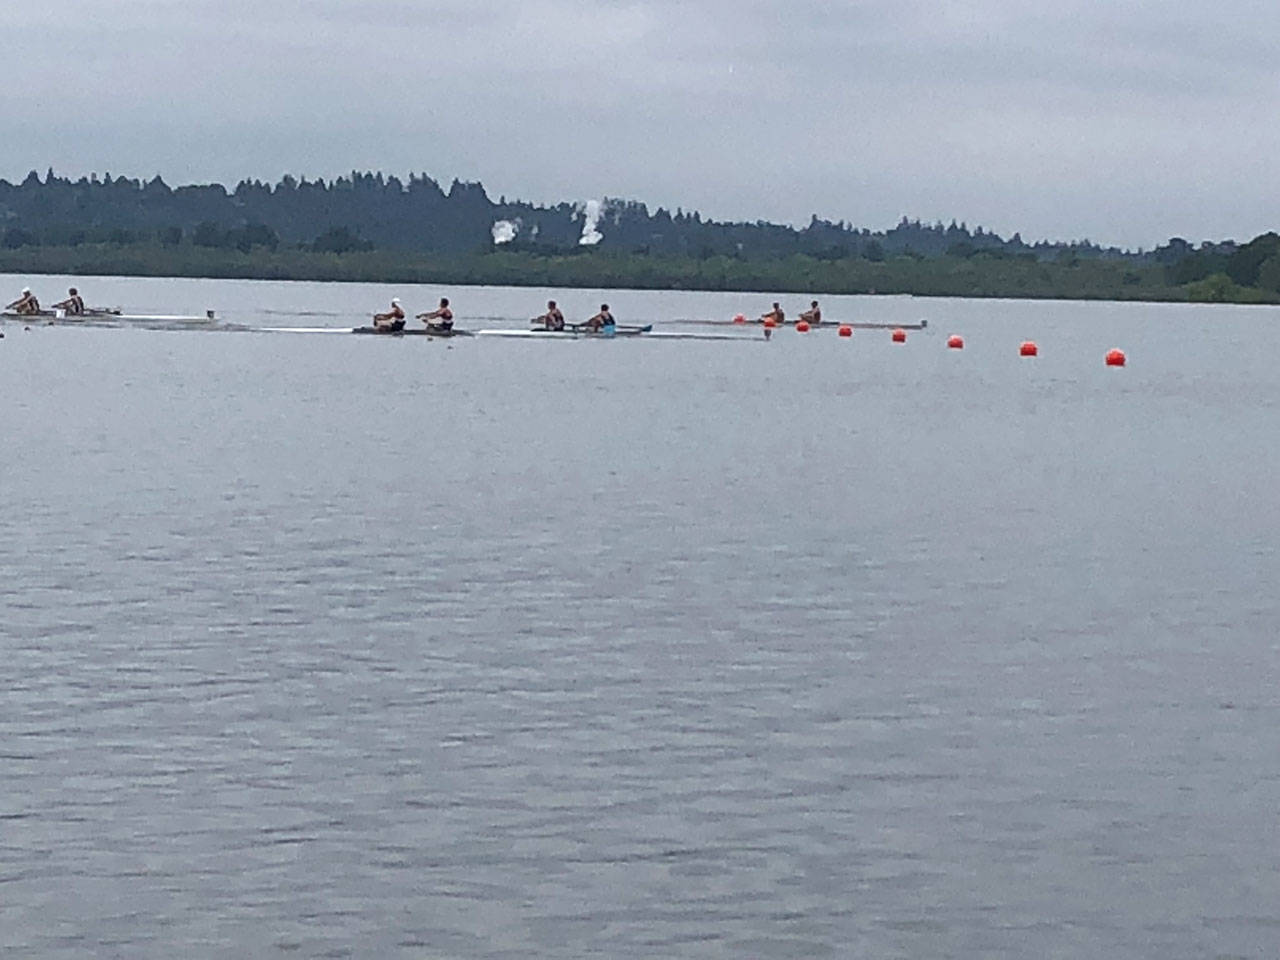 VIRC men’s varsity pair of Cooper Py and Tor Ormseth (blue oar blades) edge out the competition for third place at Northwest Junior Regionals last weekend, earning them an invitation to Nationals in June. (Martha Ormseth Photo)